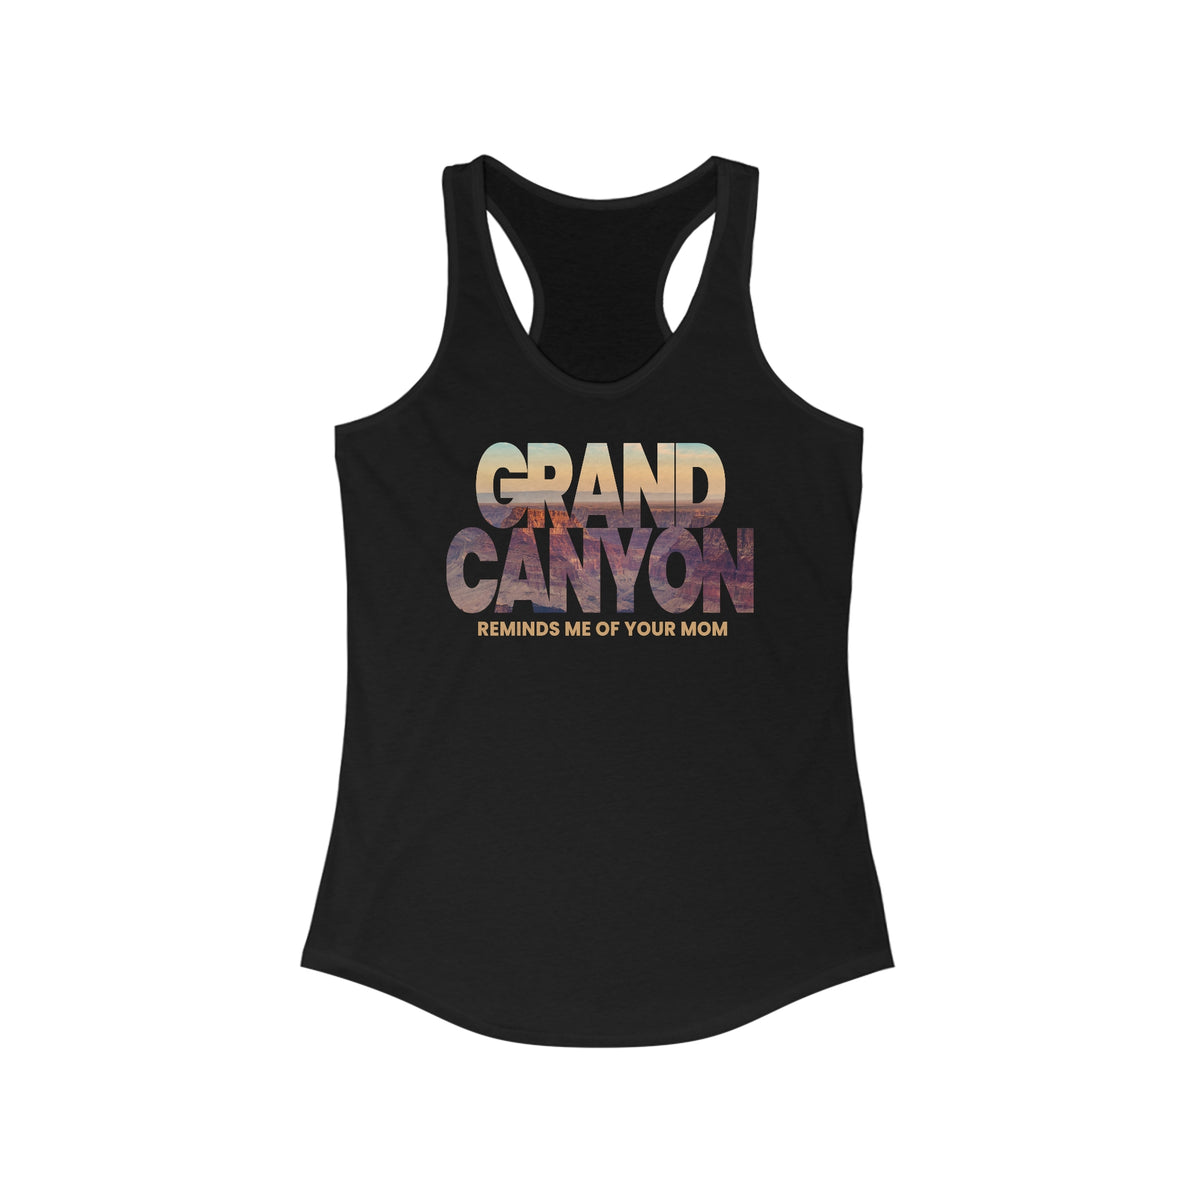 Grand Canyon - Reminds Me Of Your Mom  - Women’s Racerback Tank